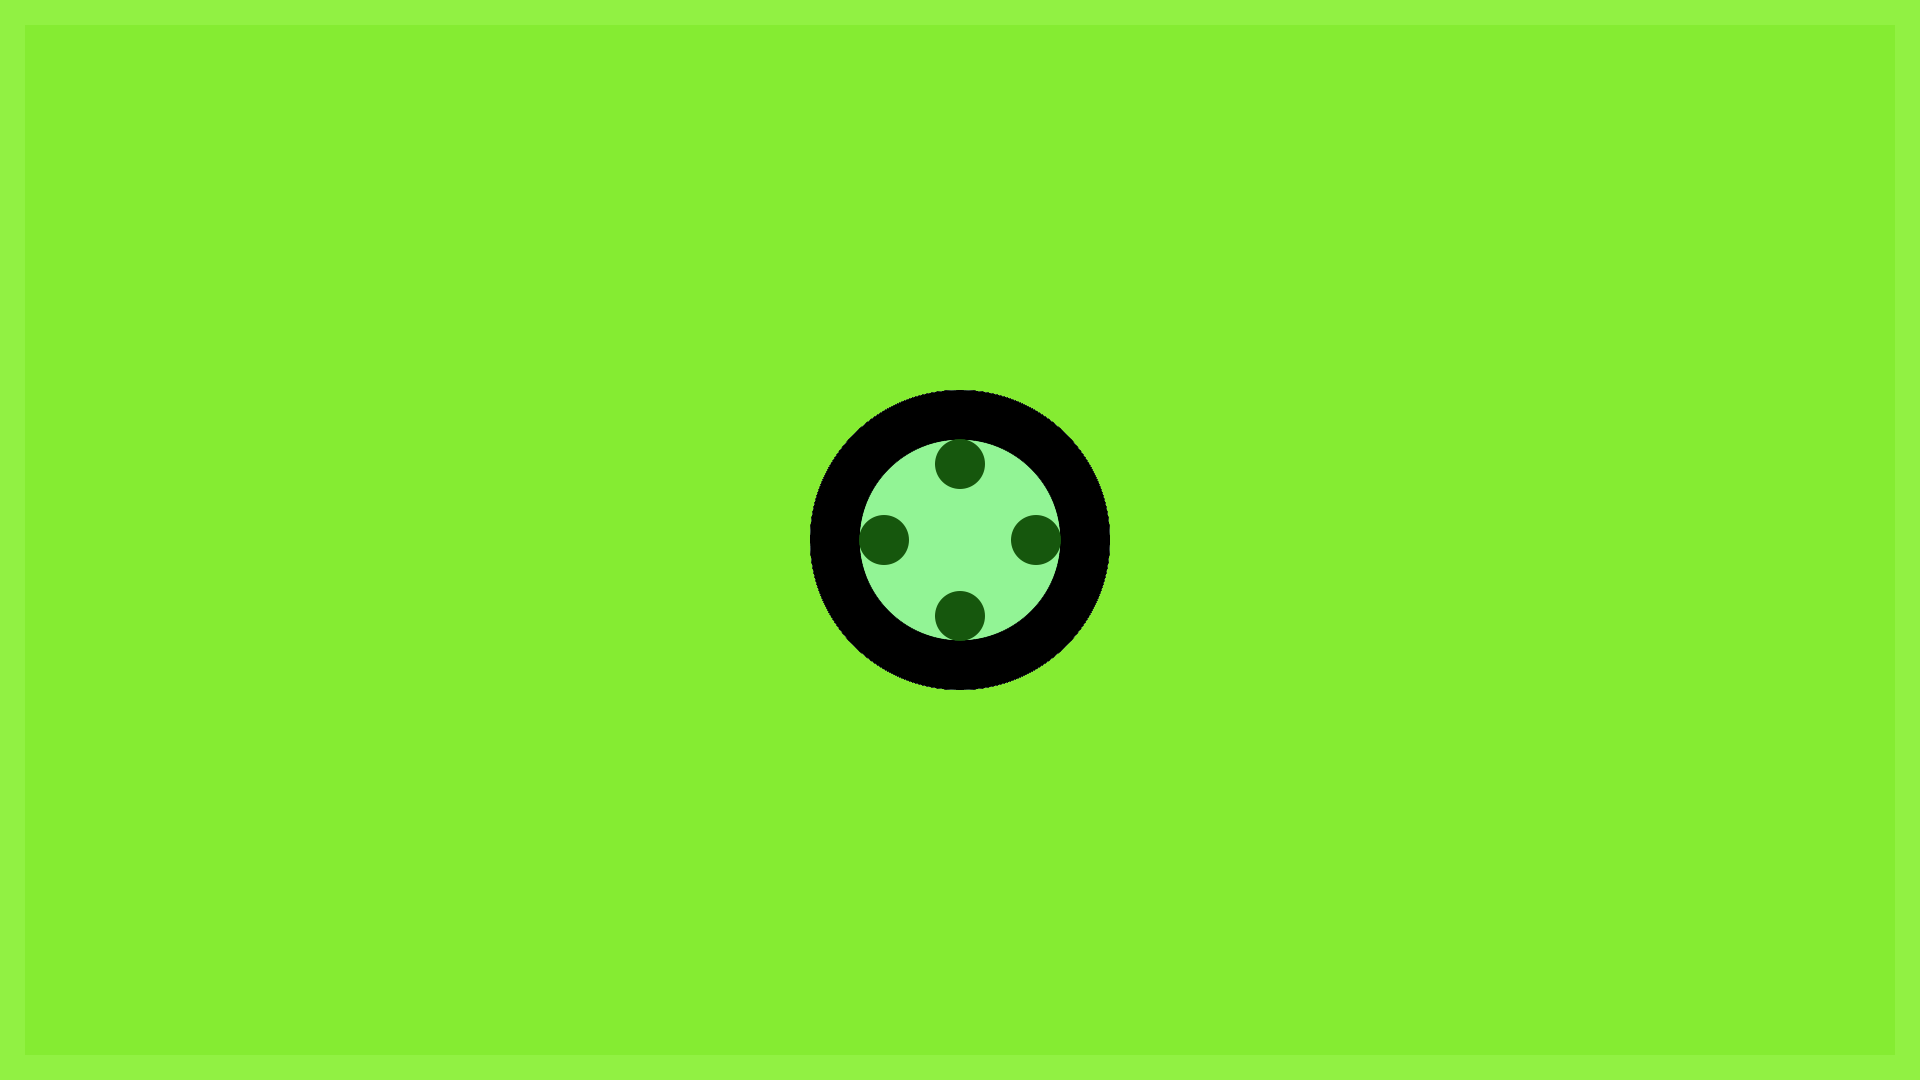 Circle Dots Minimalism Simple Green Background Simple Background 1920x1080